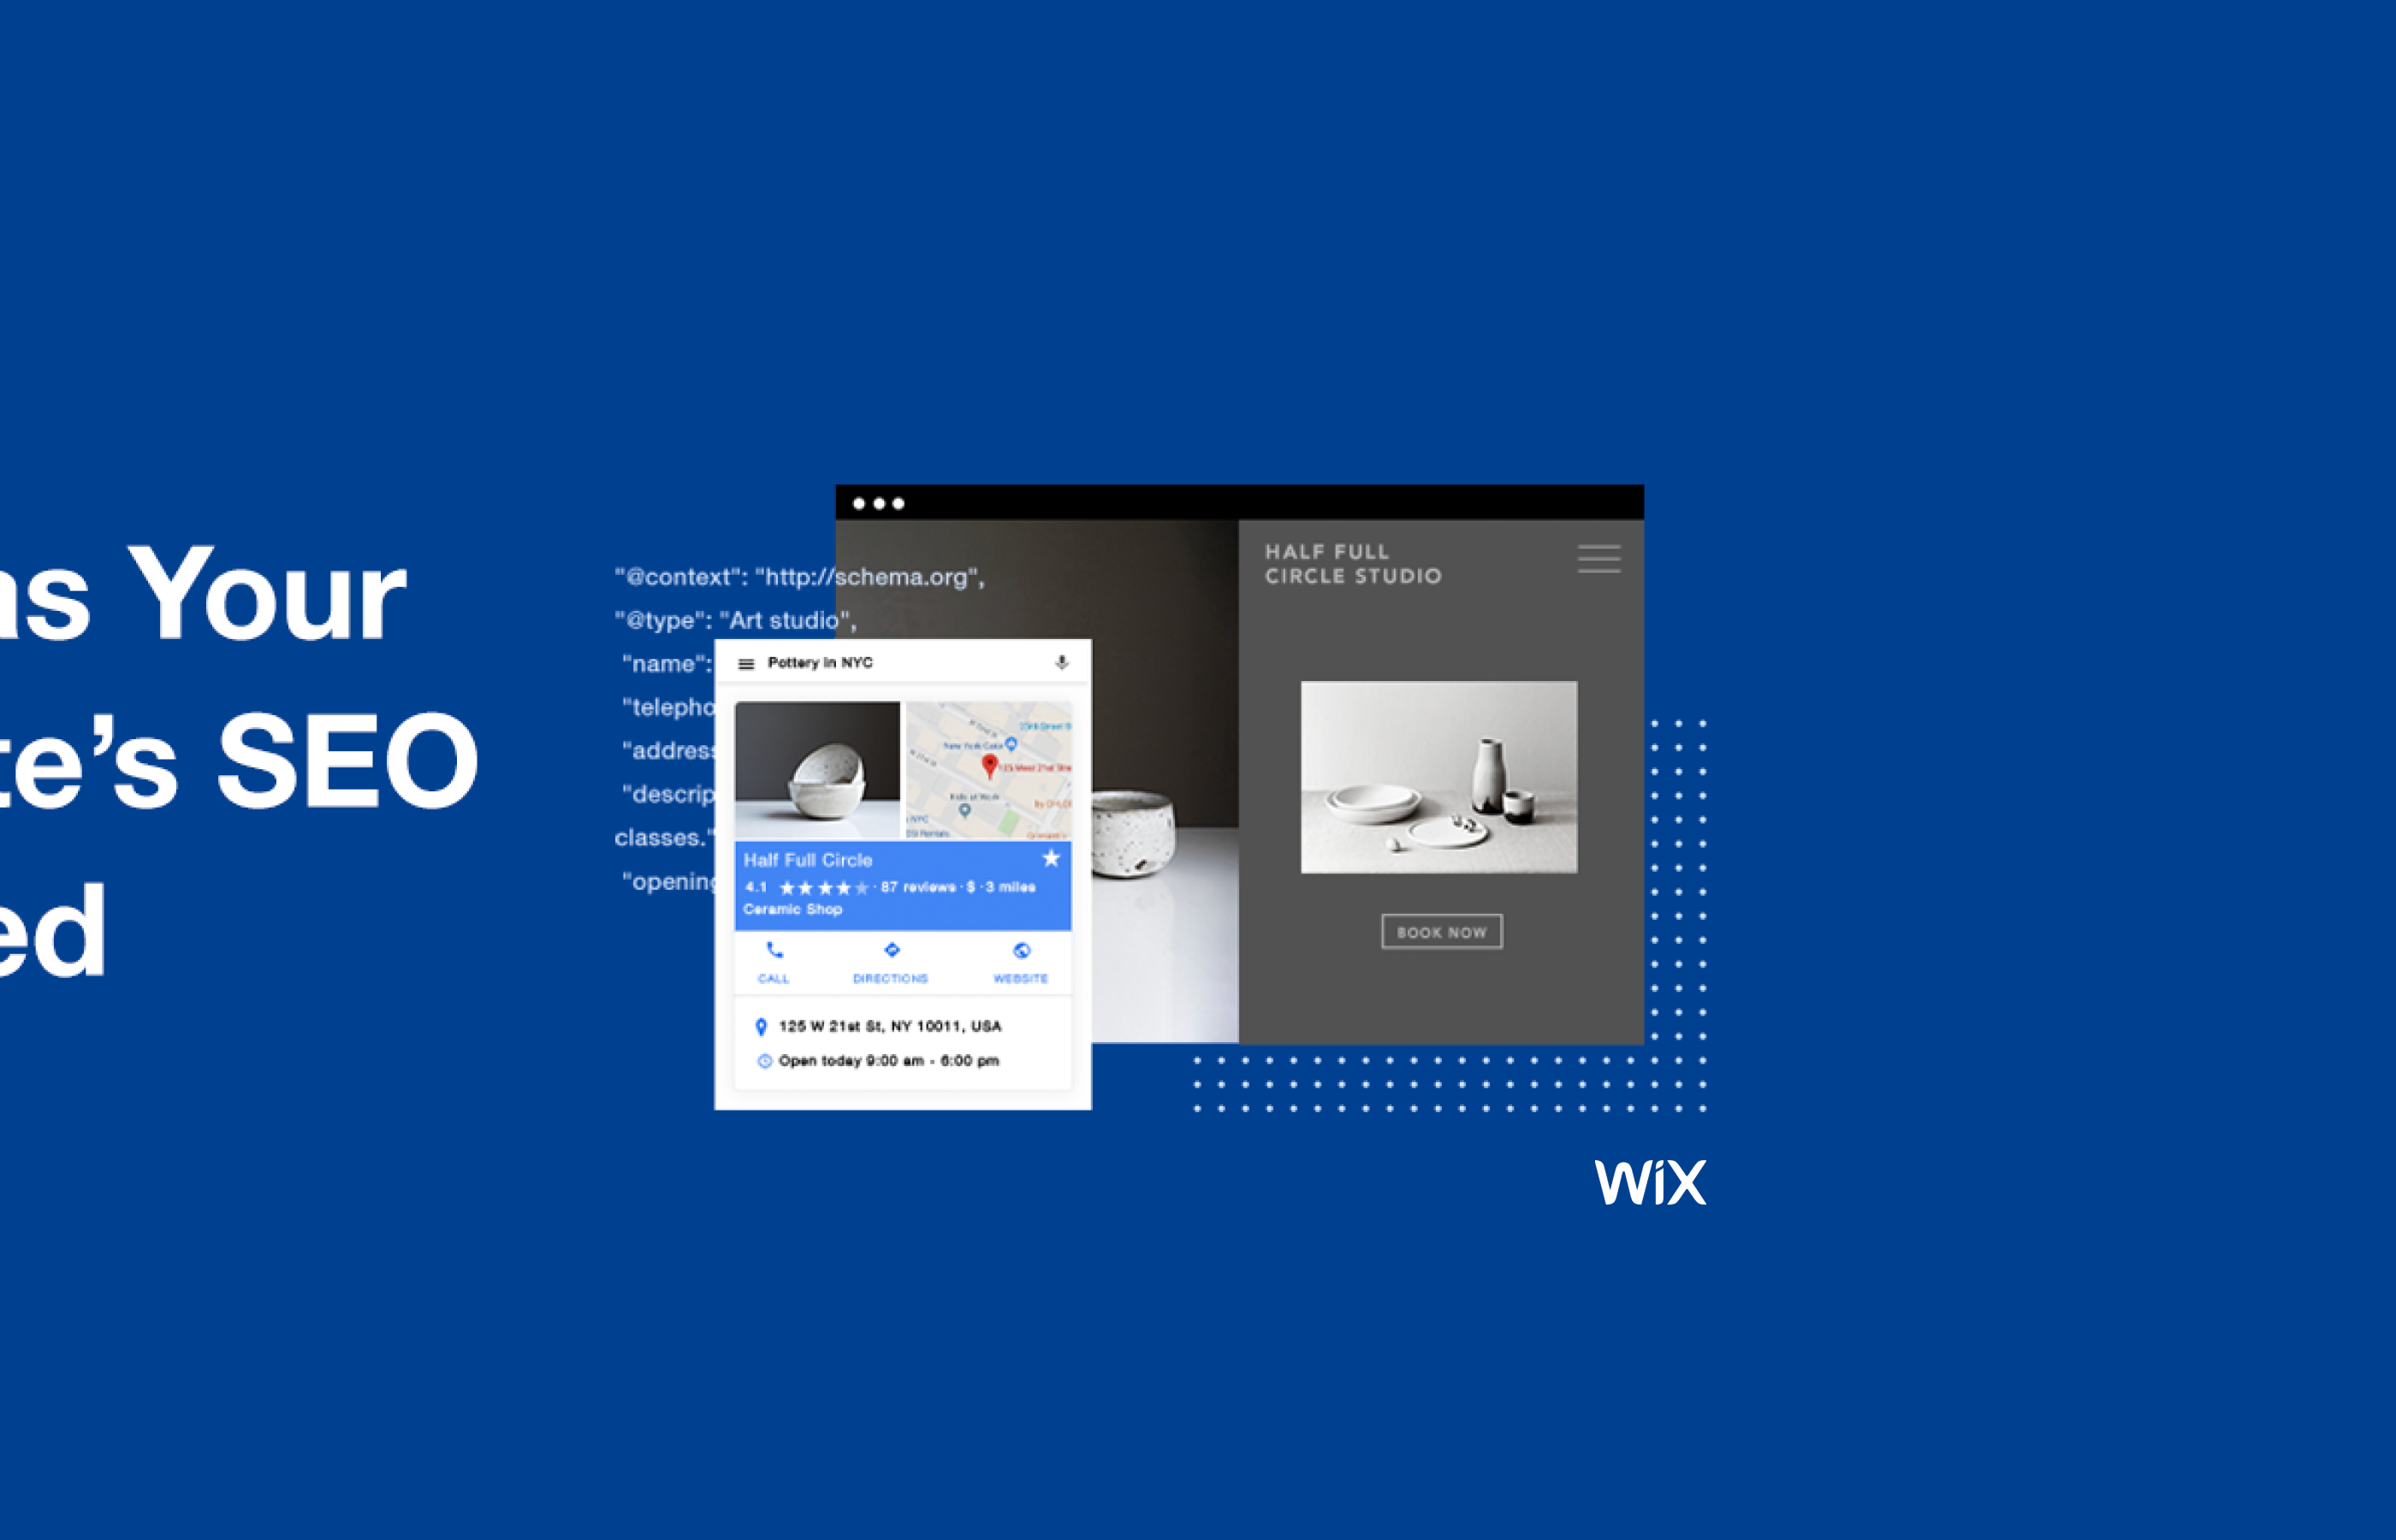 Profile Page screen design idea #191: Get better SEO results for your site with WIX